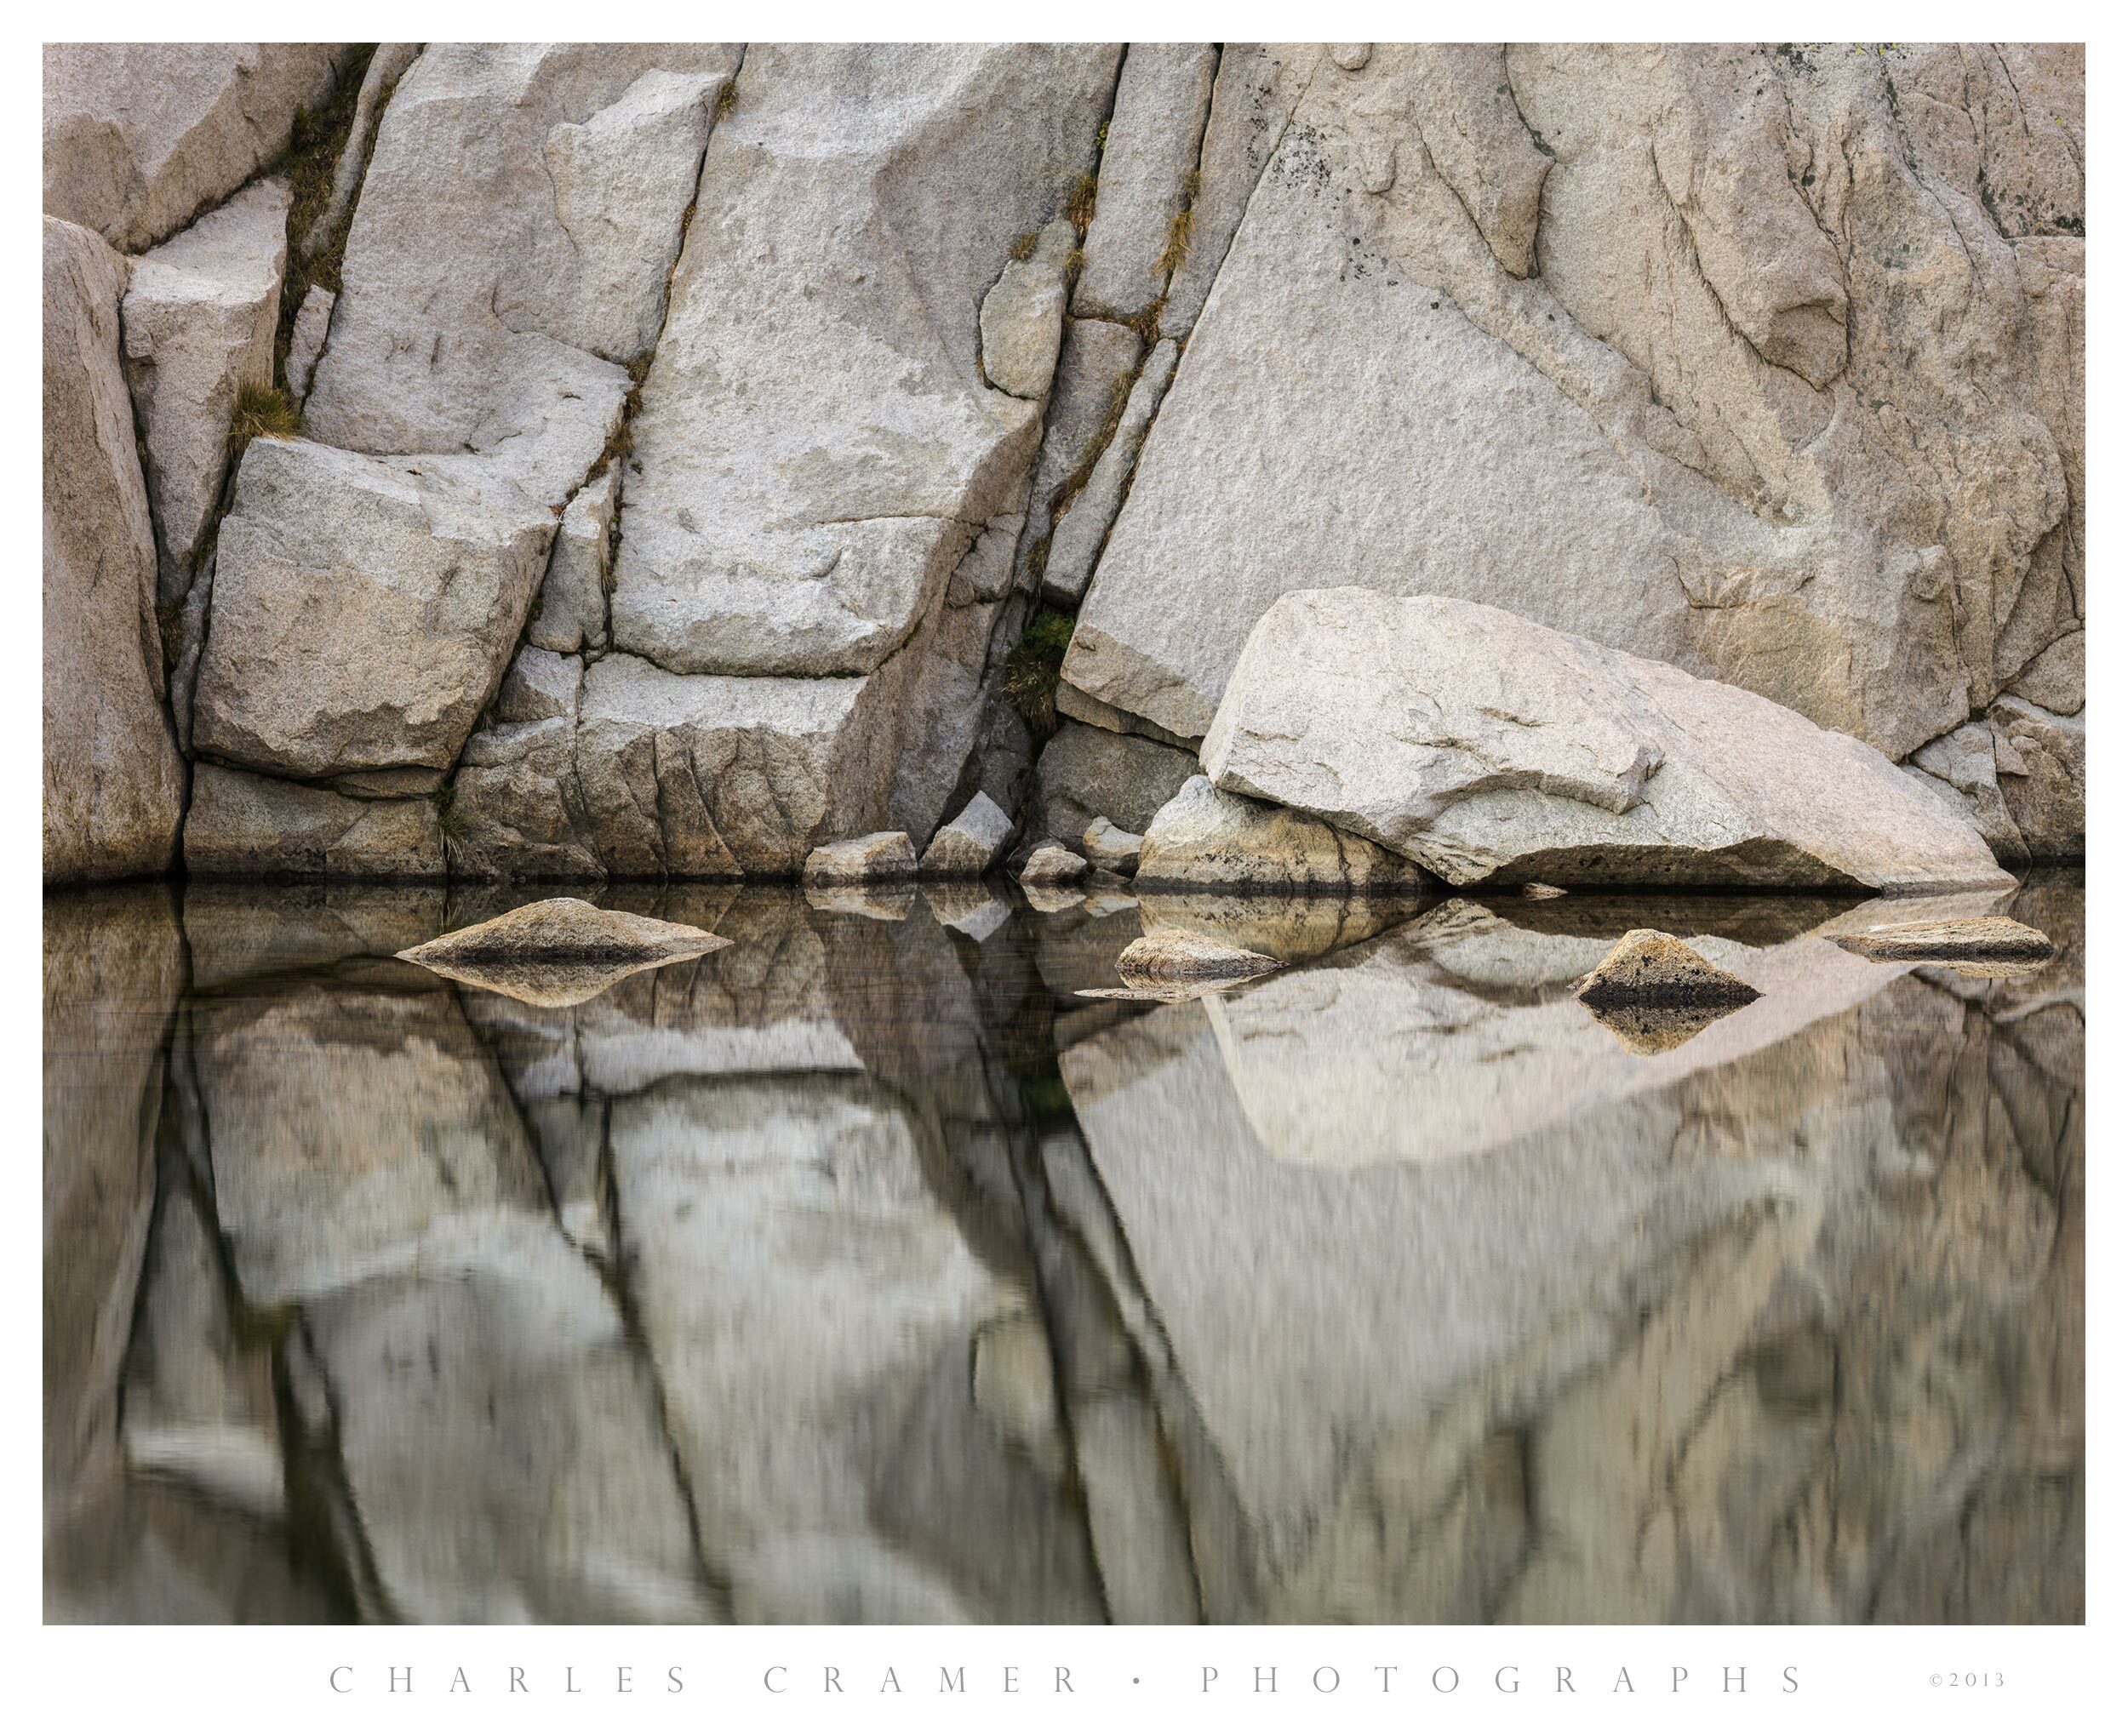 Rocks Reflected in Alpine Pool, Kings Canyon Backcountry